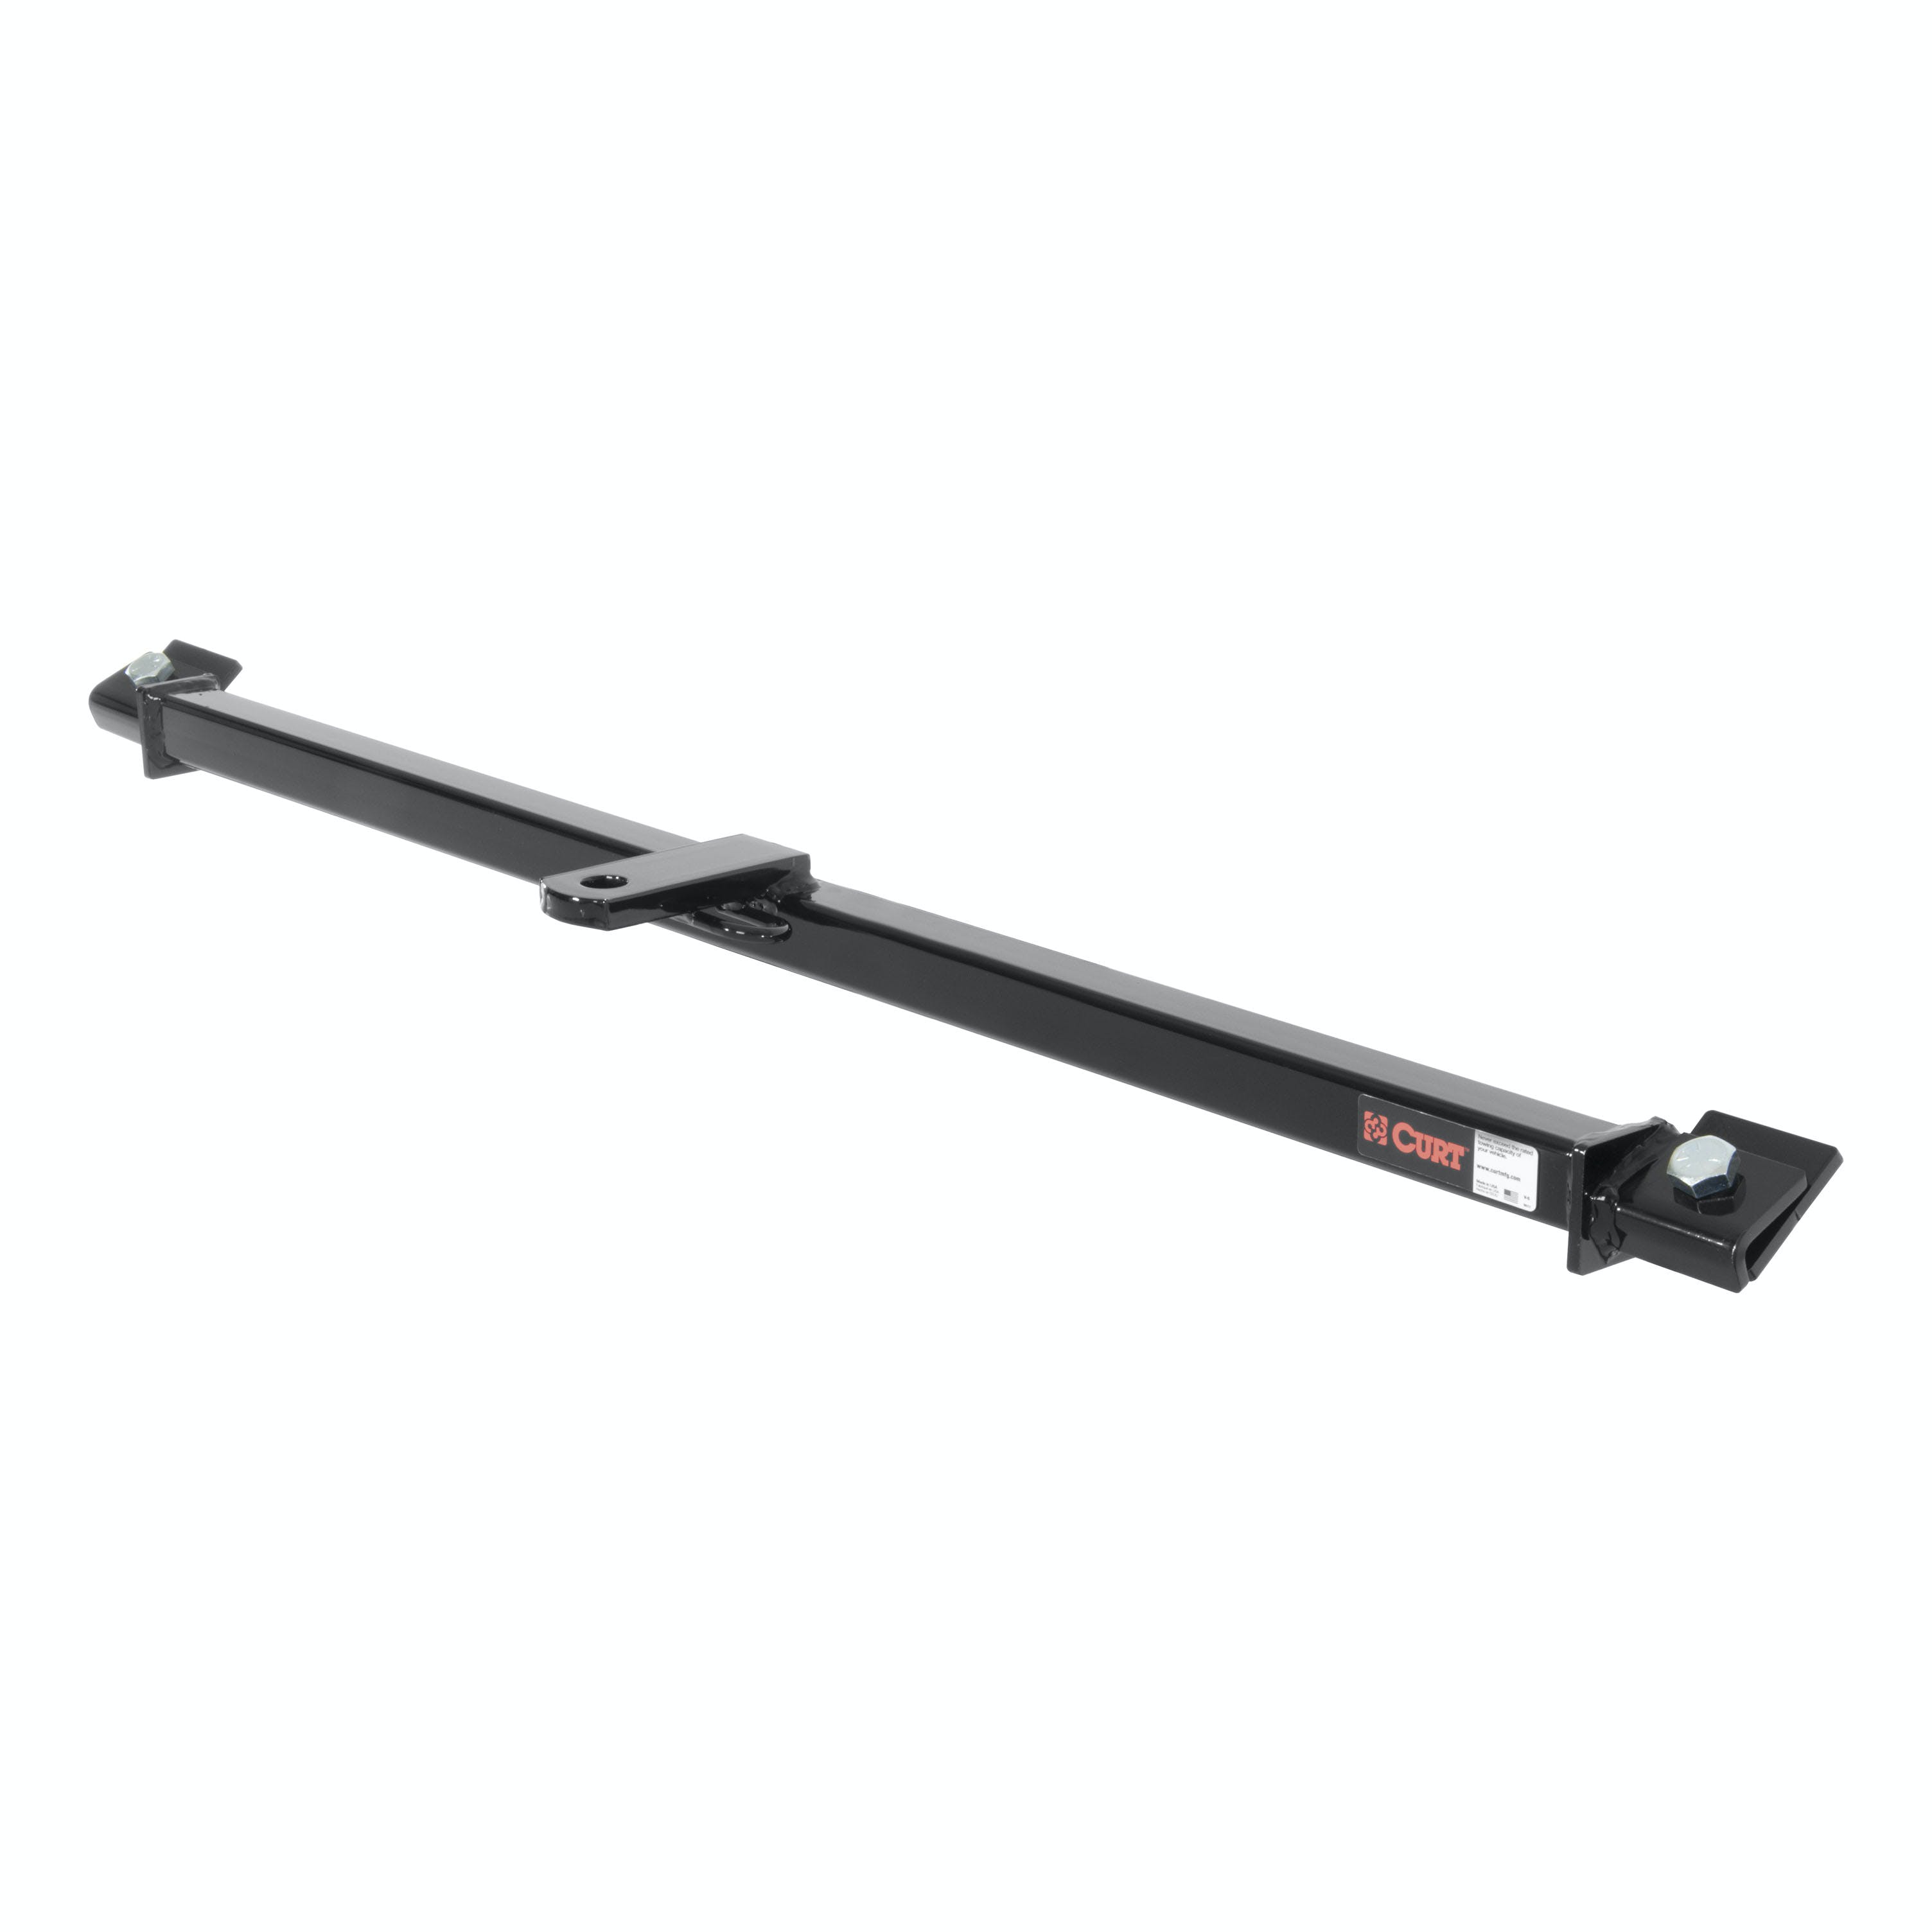 CURT 11656 Class 1 Fixed-Tongue Trailer Hitch with 3/4 Trailer Ball Hole